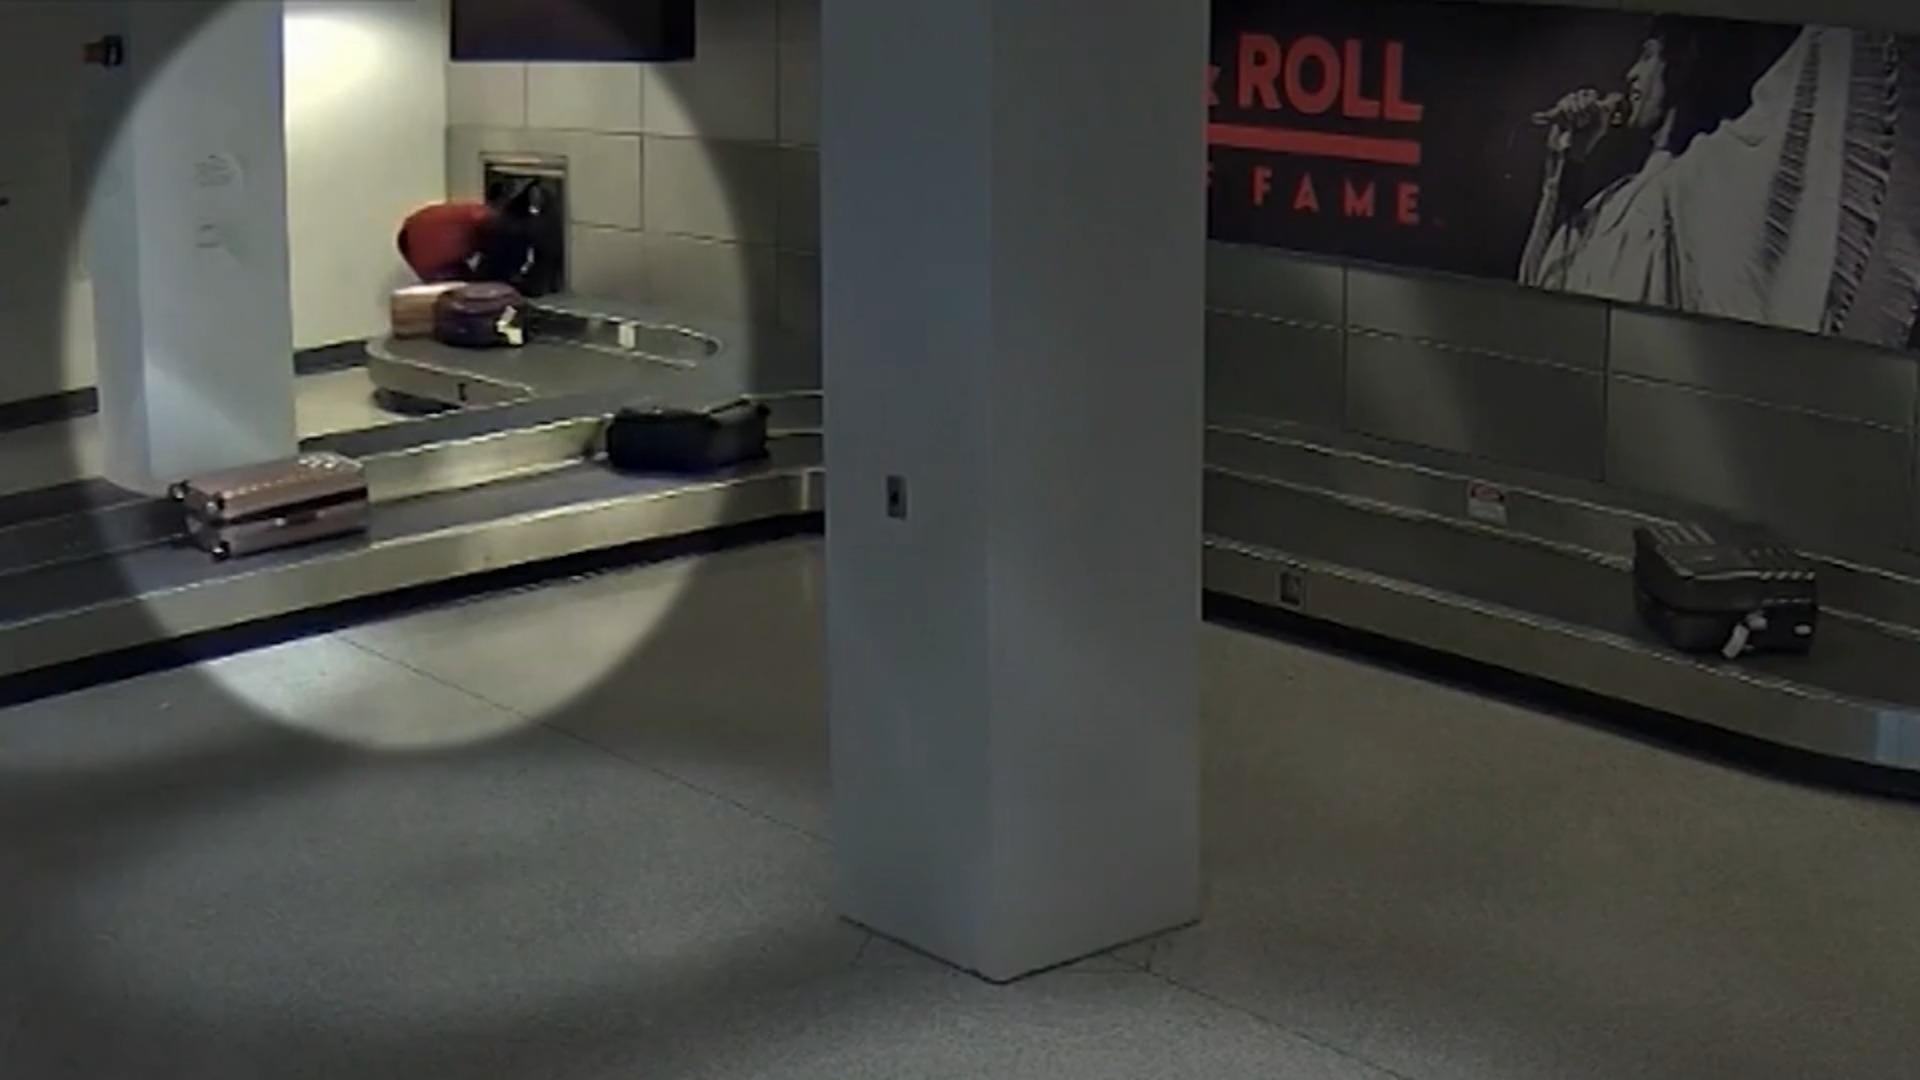 Man Climbs Behind The Baggage Carousel At The Airport Because He Was Looking For His Shoes